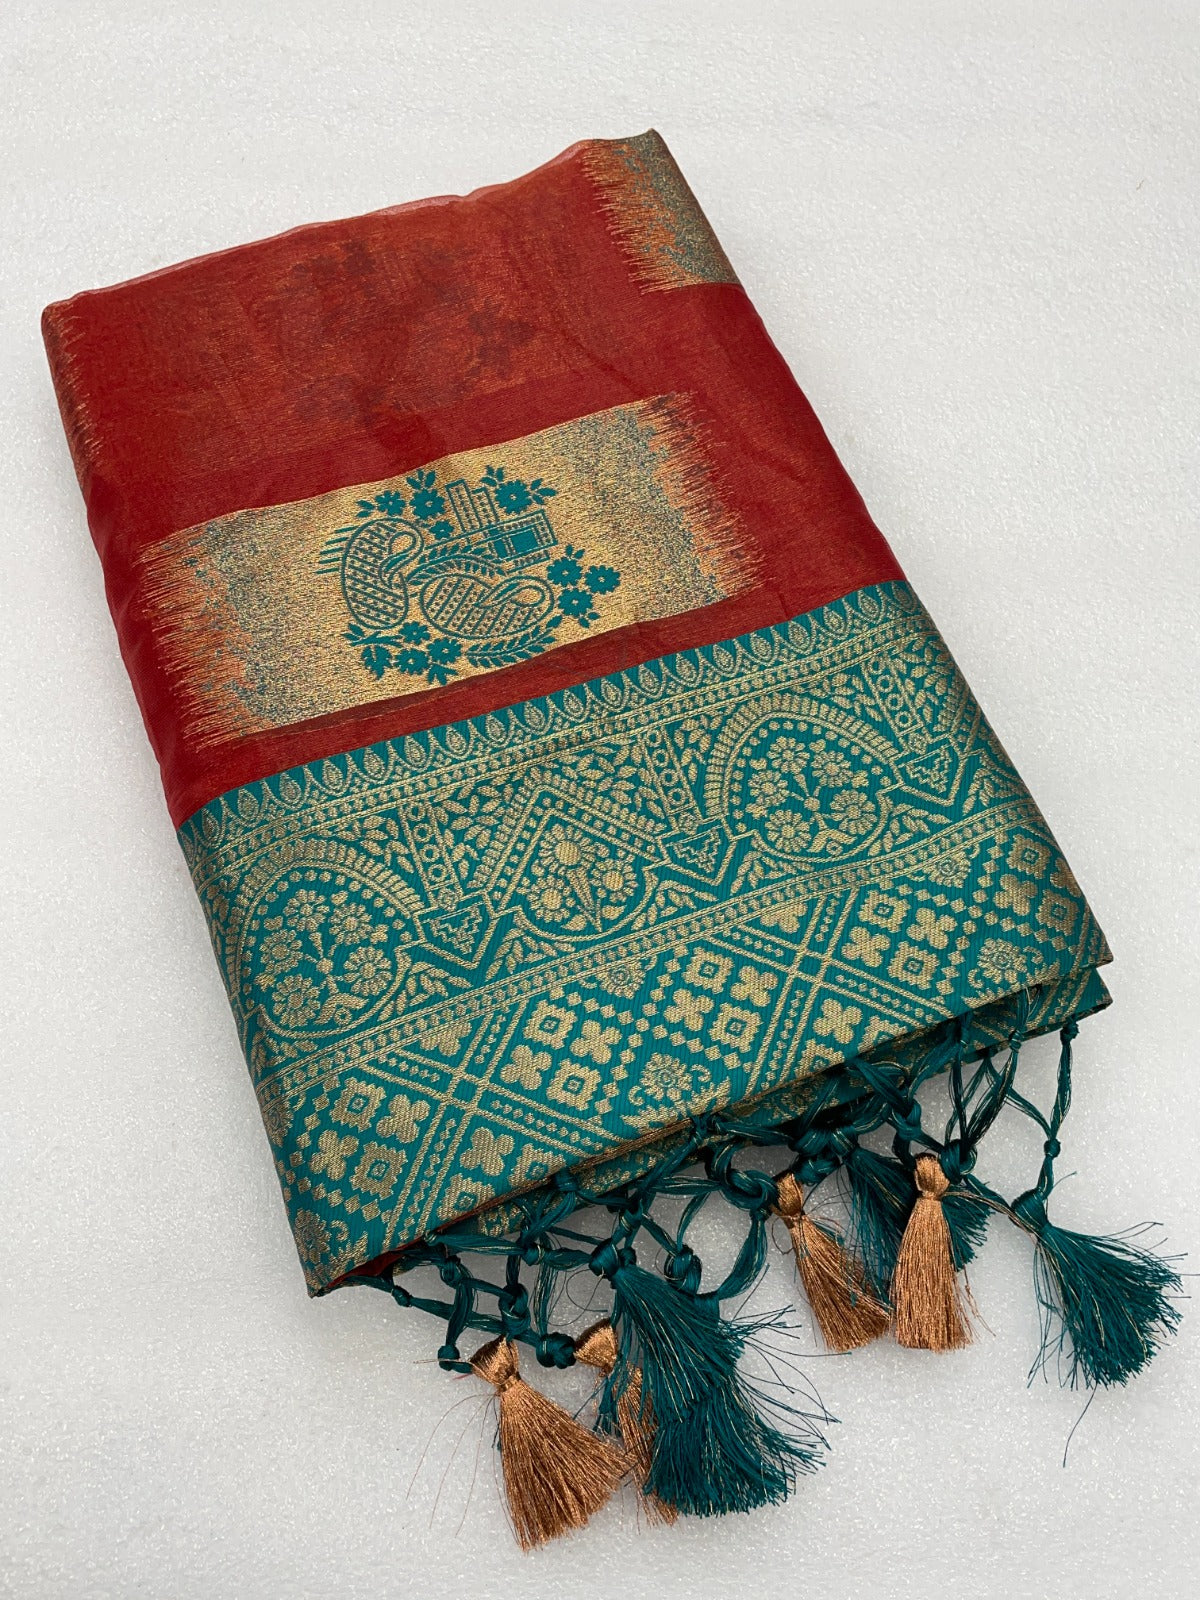 South Indian Silk Saree with Peacock Feather Design